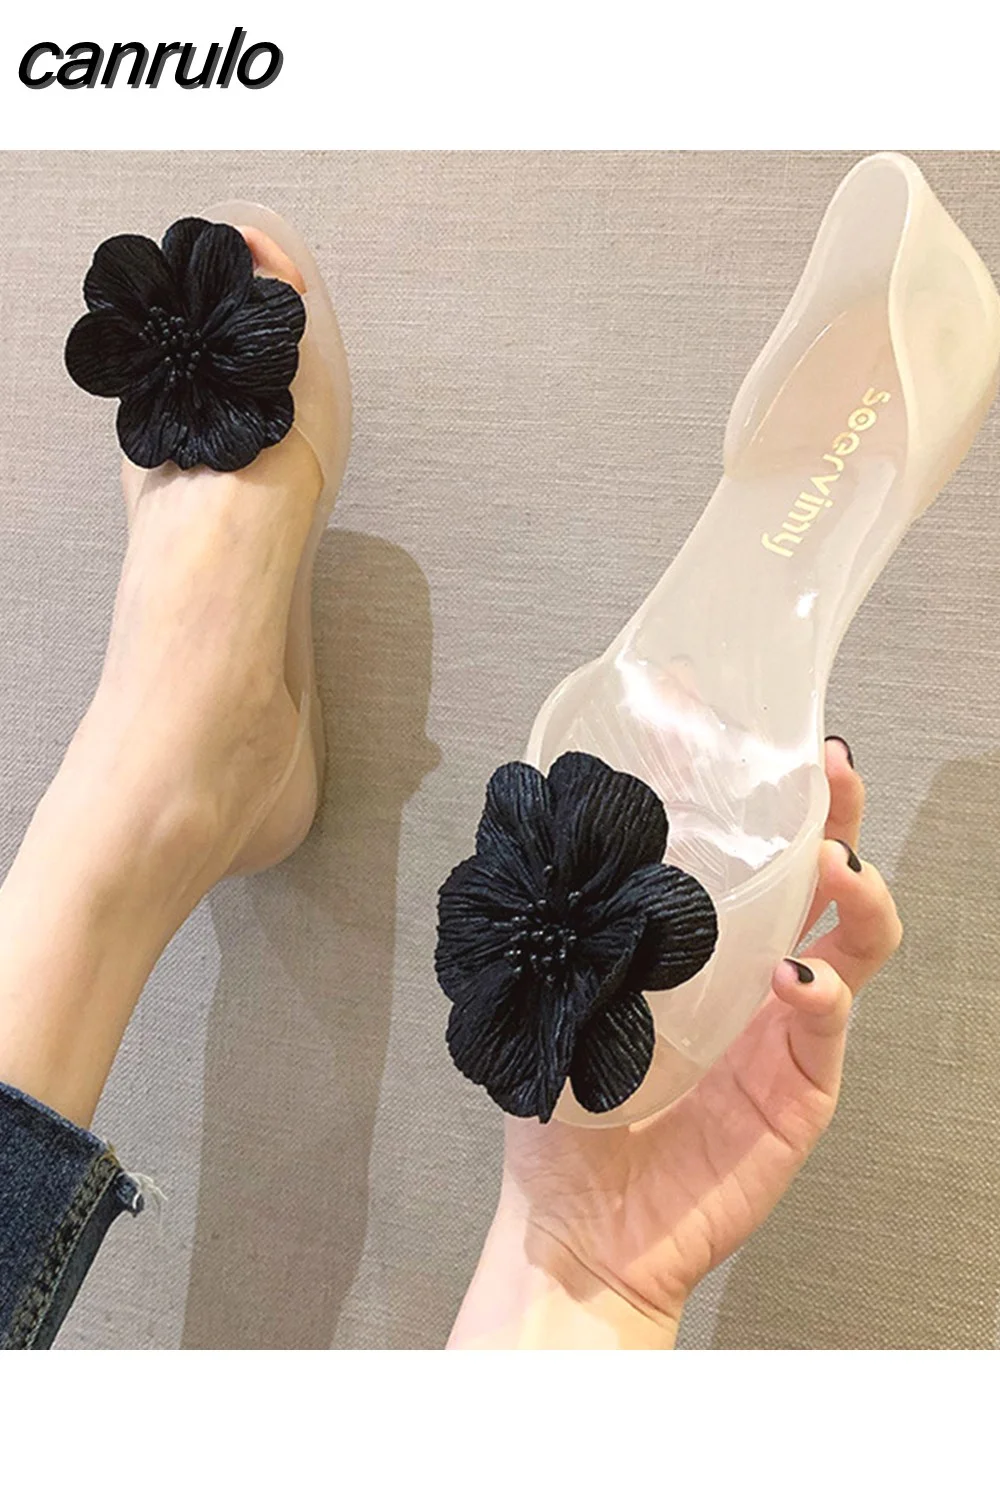 canrulo Flats Women Low Price Shoes With Flower PVC Jelly Sandals Summer 2023 Elegant Fashion Free Shipping Beach Ladies Slippers